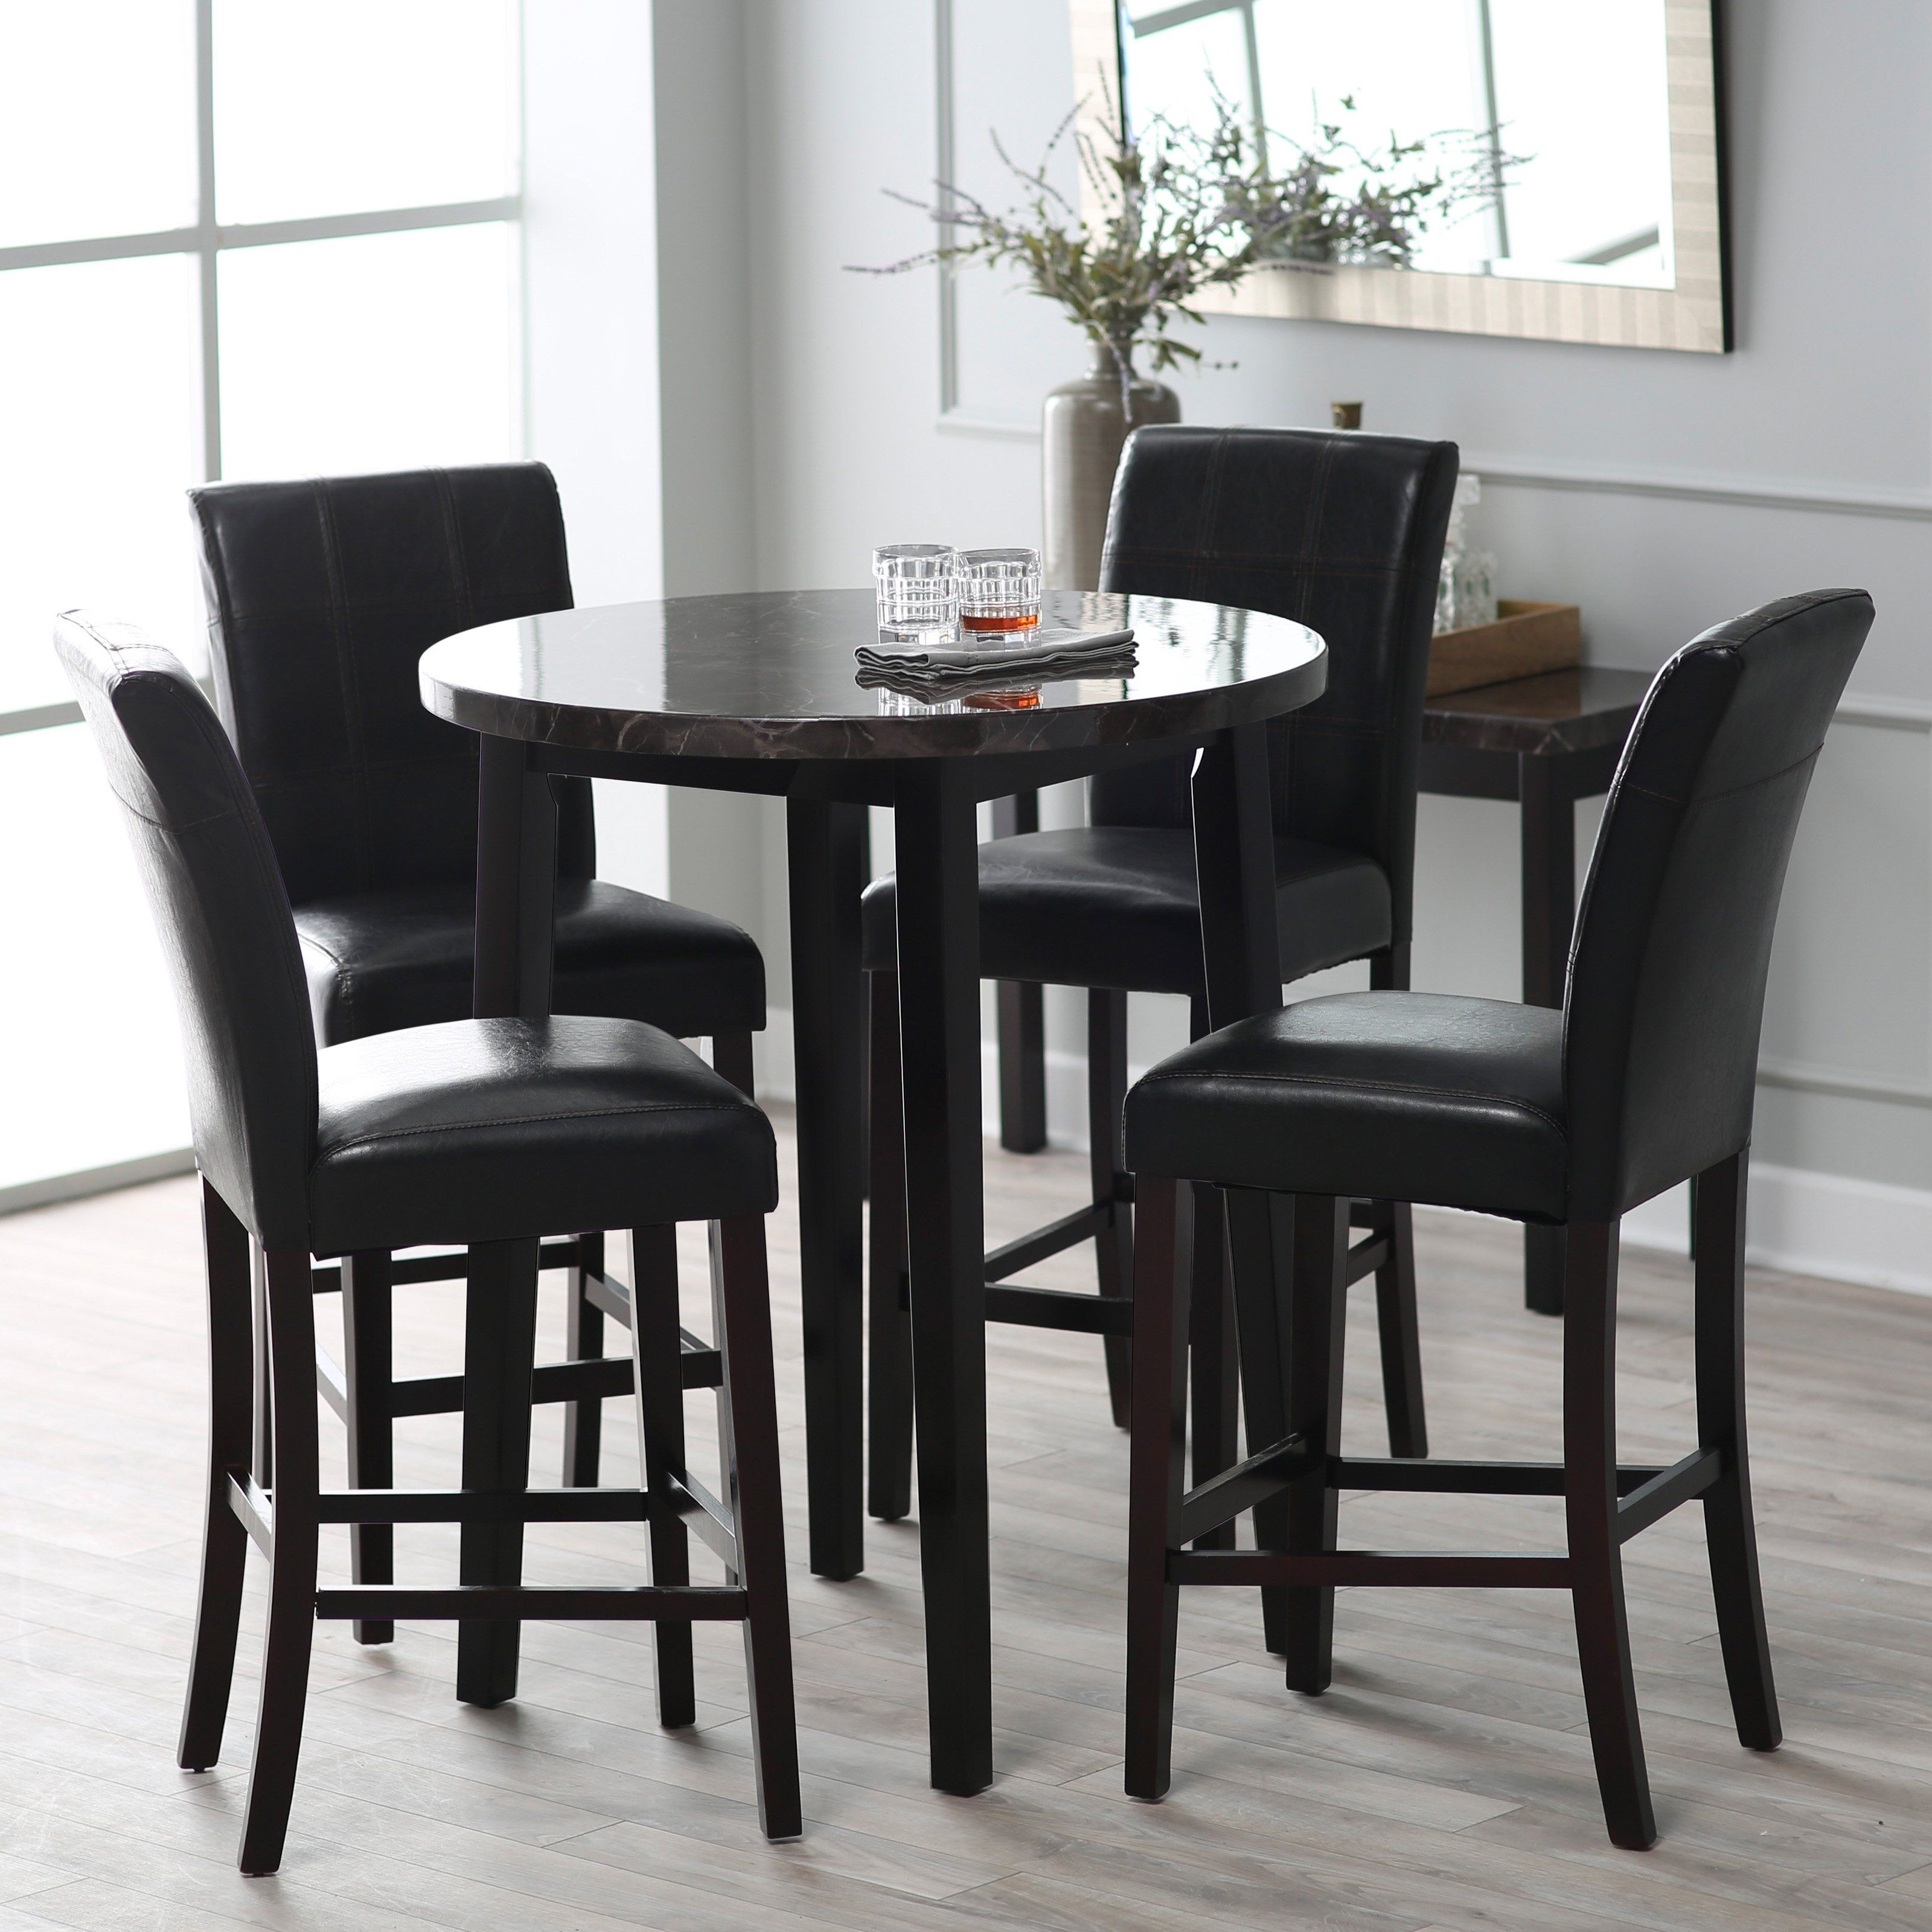 Finley Home Milano Pub Table | Hayneedle Regarding Most Popular Palazzo 3 Piece Dining Table Sets (View 17 of 20)